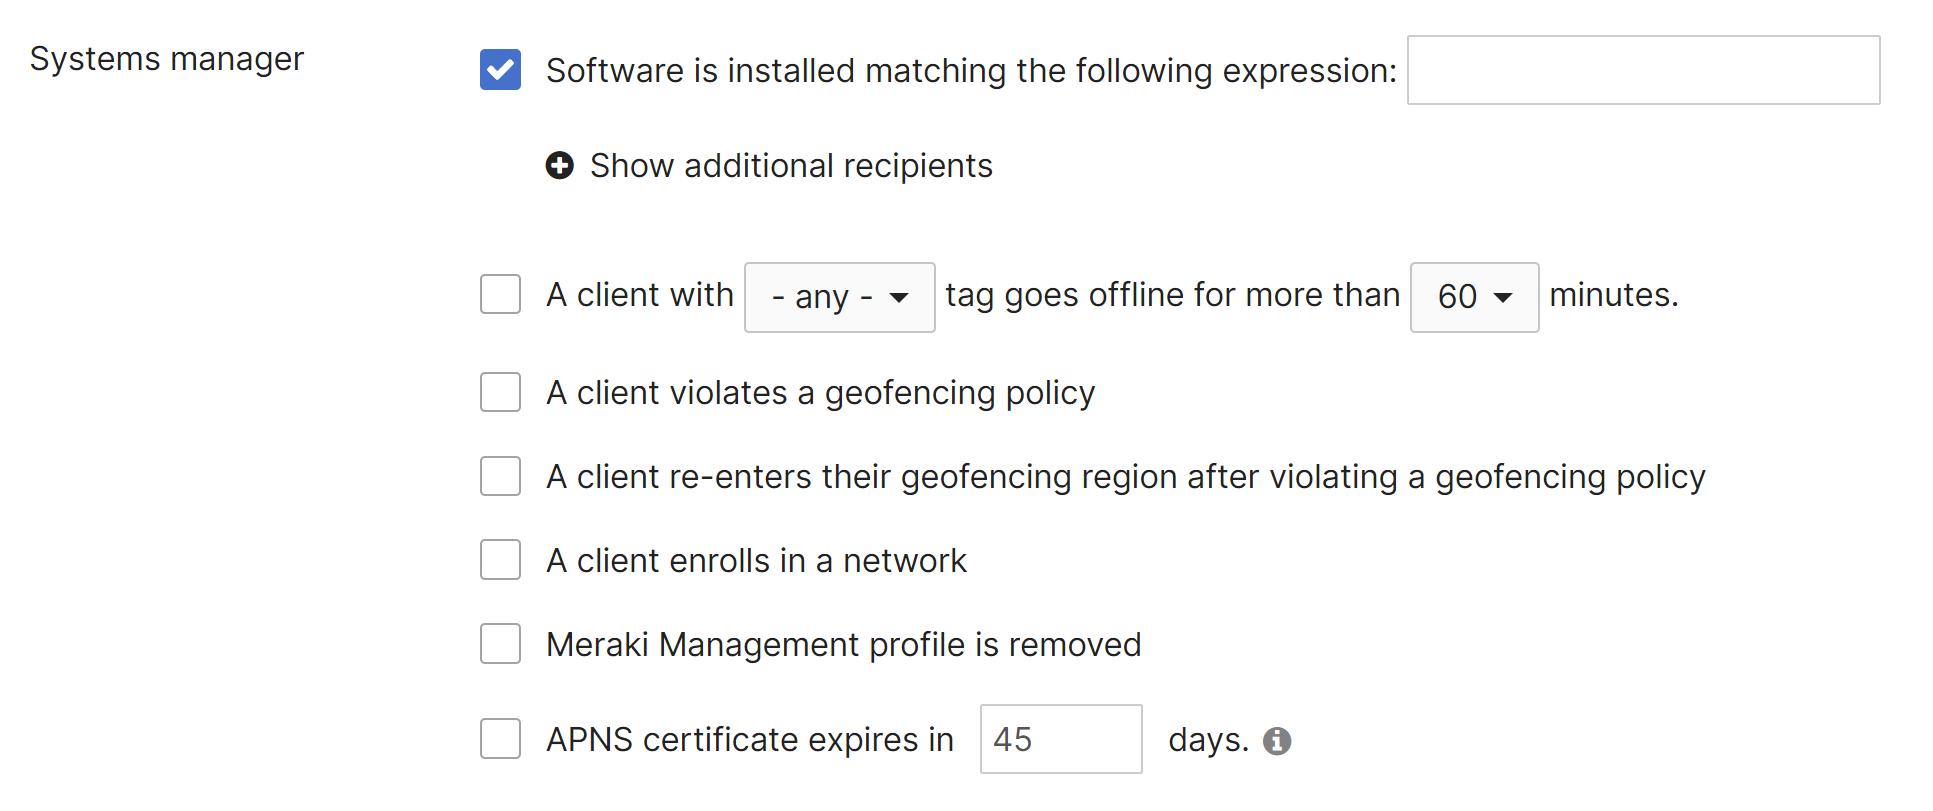 Systems manager alert settings under Network-wide > Configure > Alerts